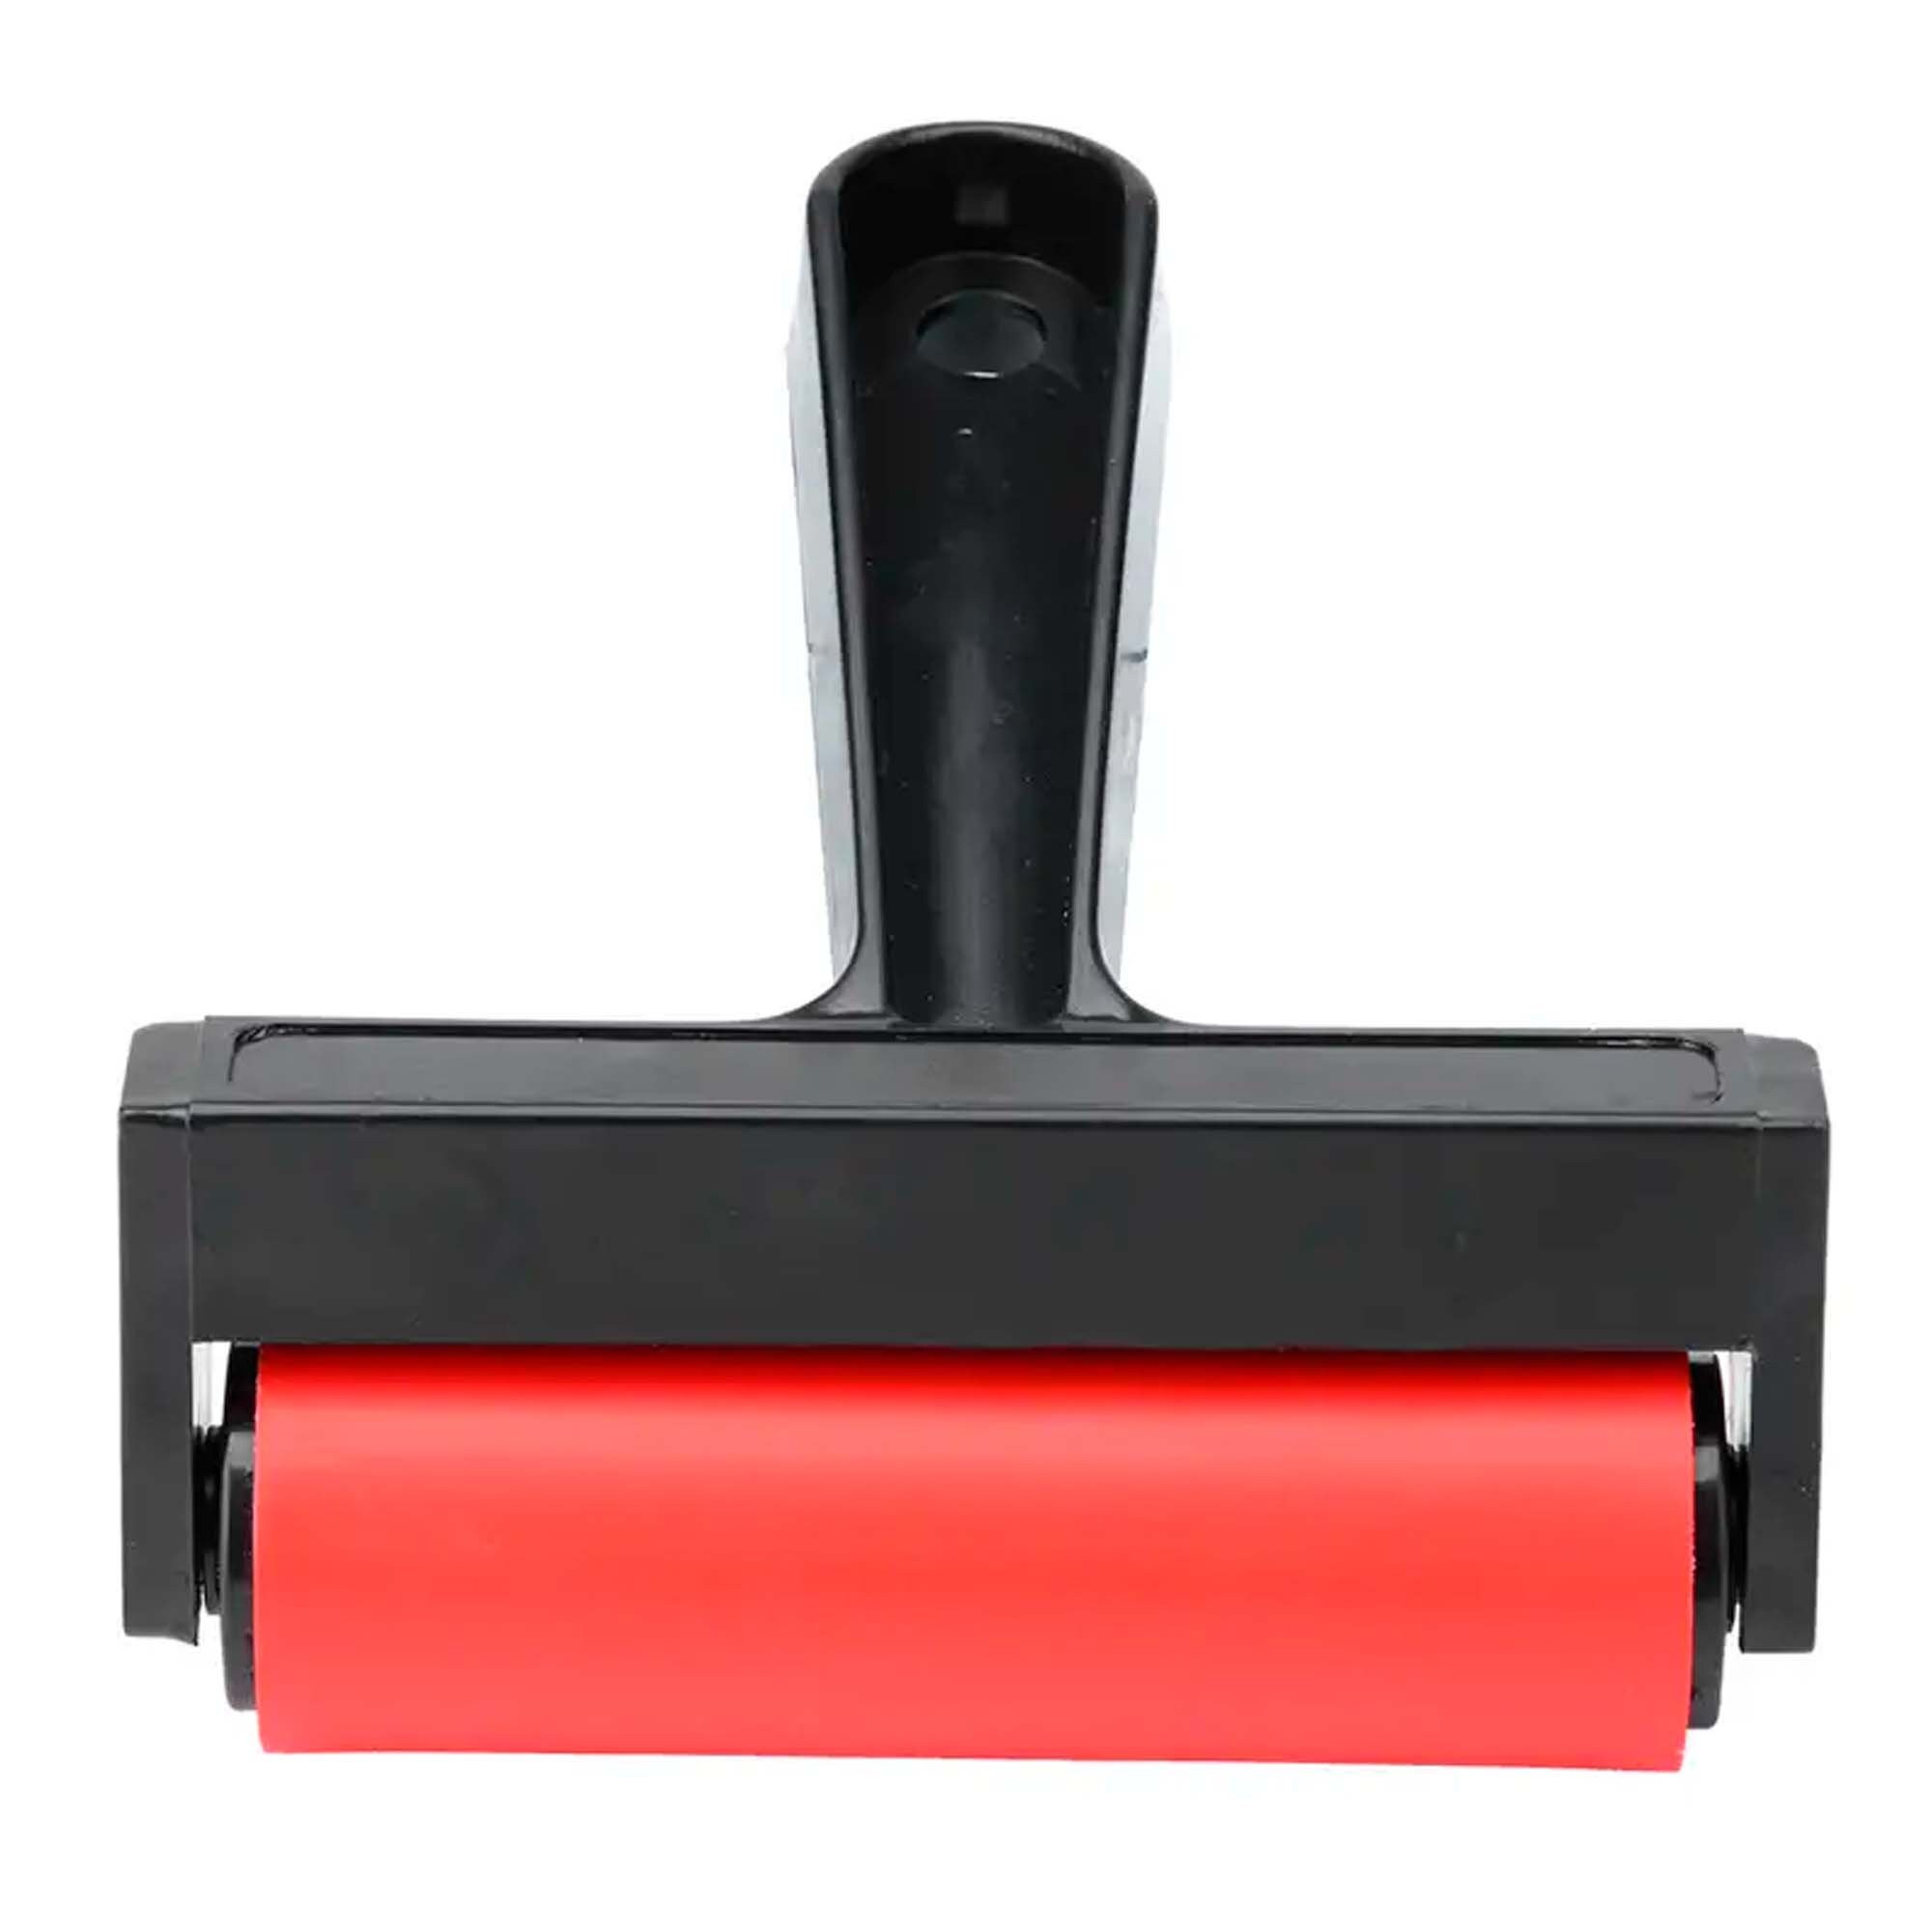 Soft Rubber Brayer Roller Diana Wakley Small 2.25 Inch to Apply